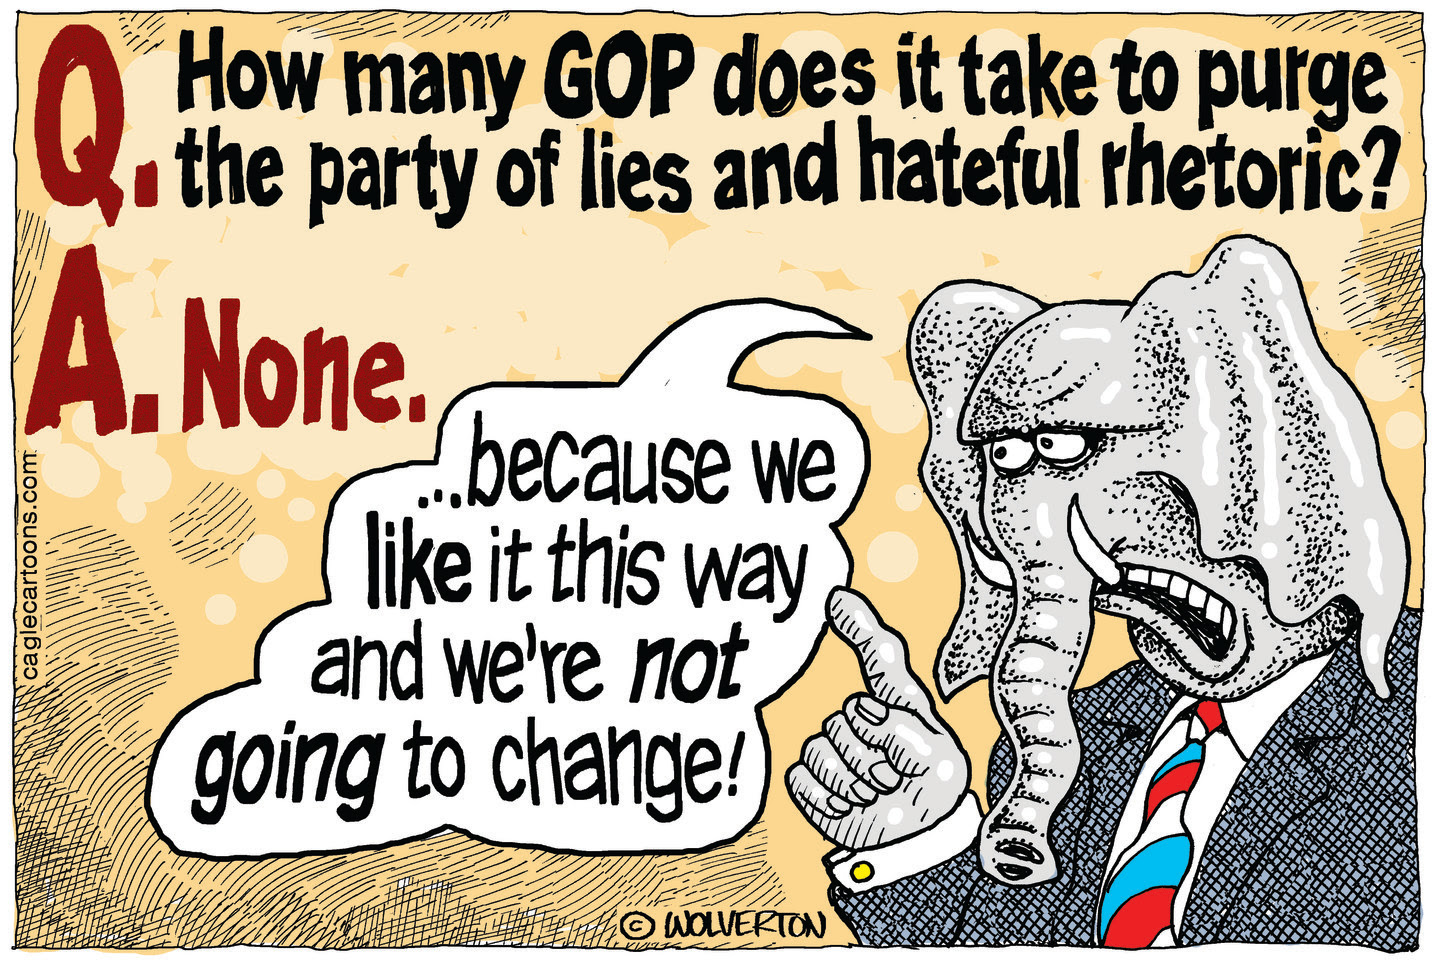 Republicans use racism to divide voters in order to stay in power.